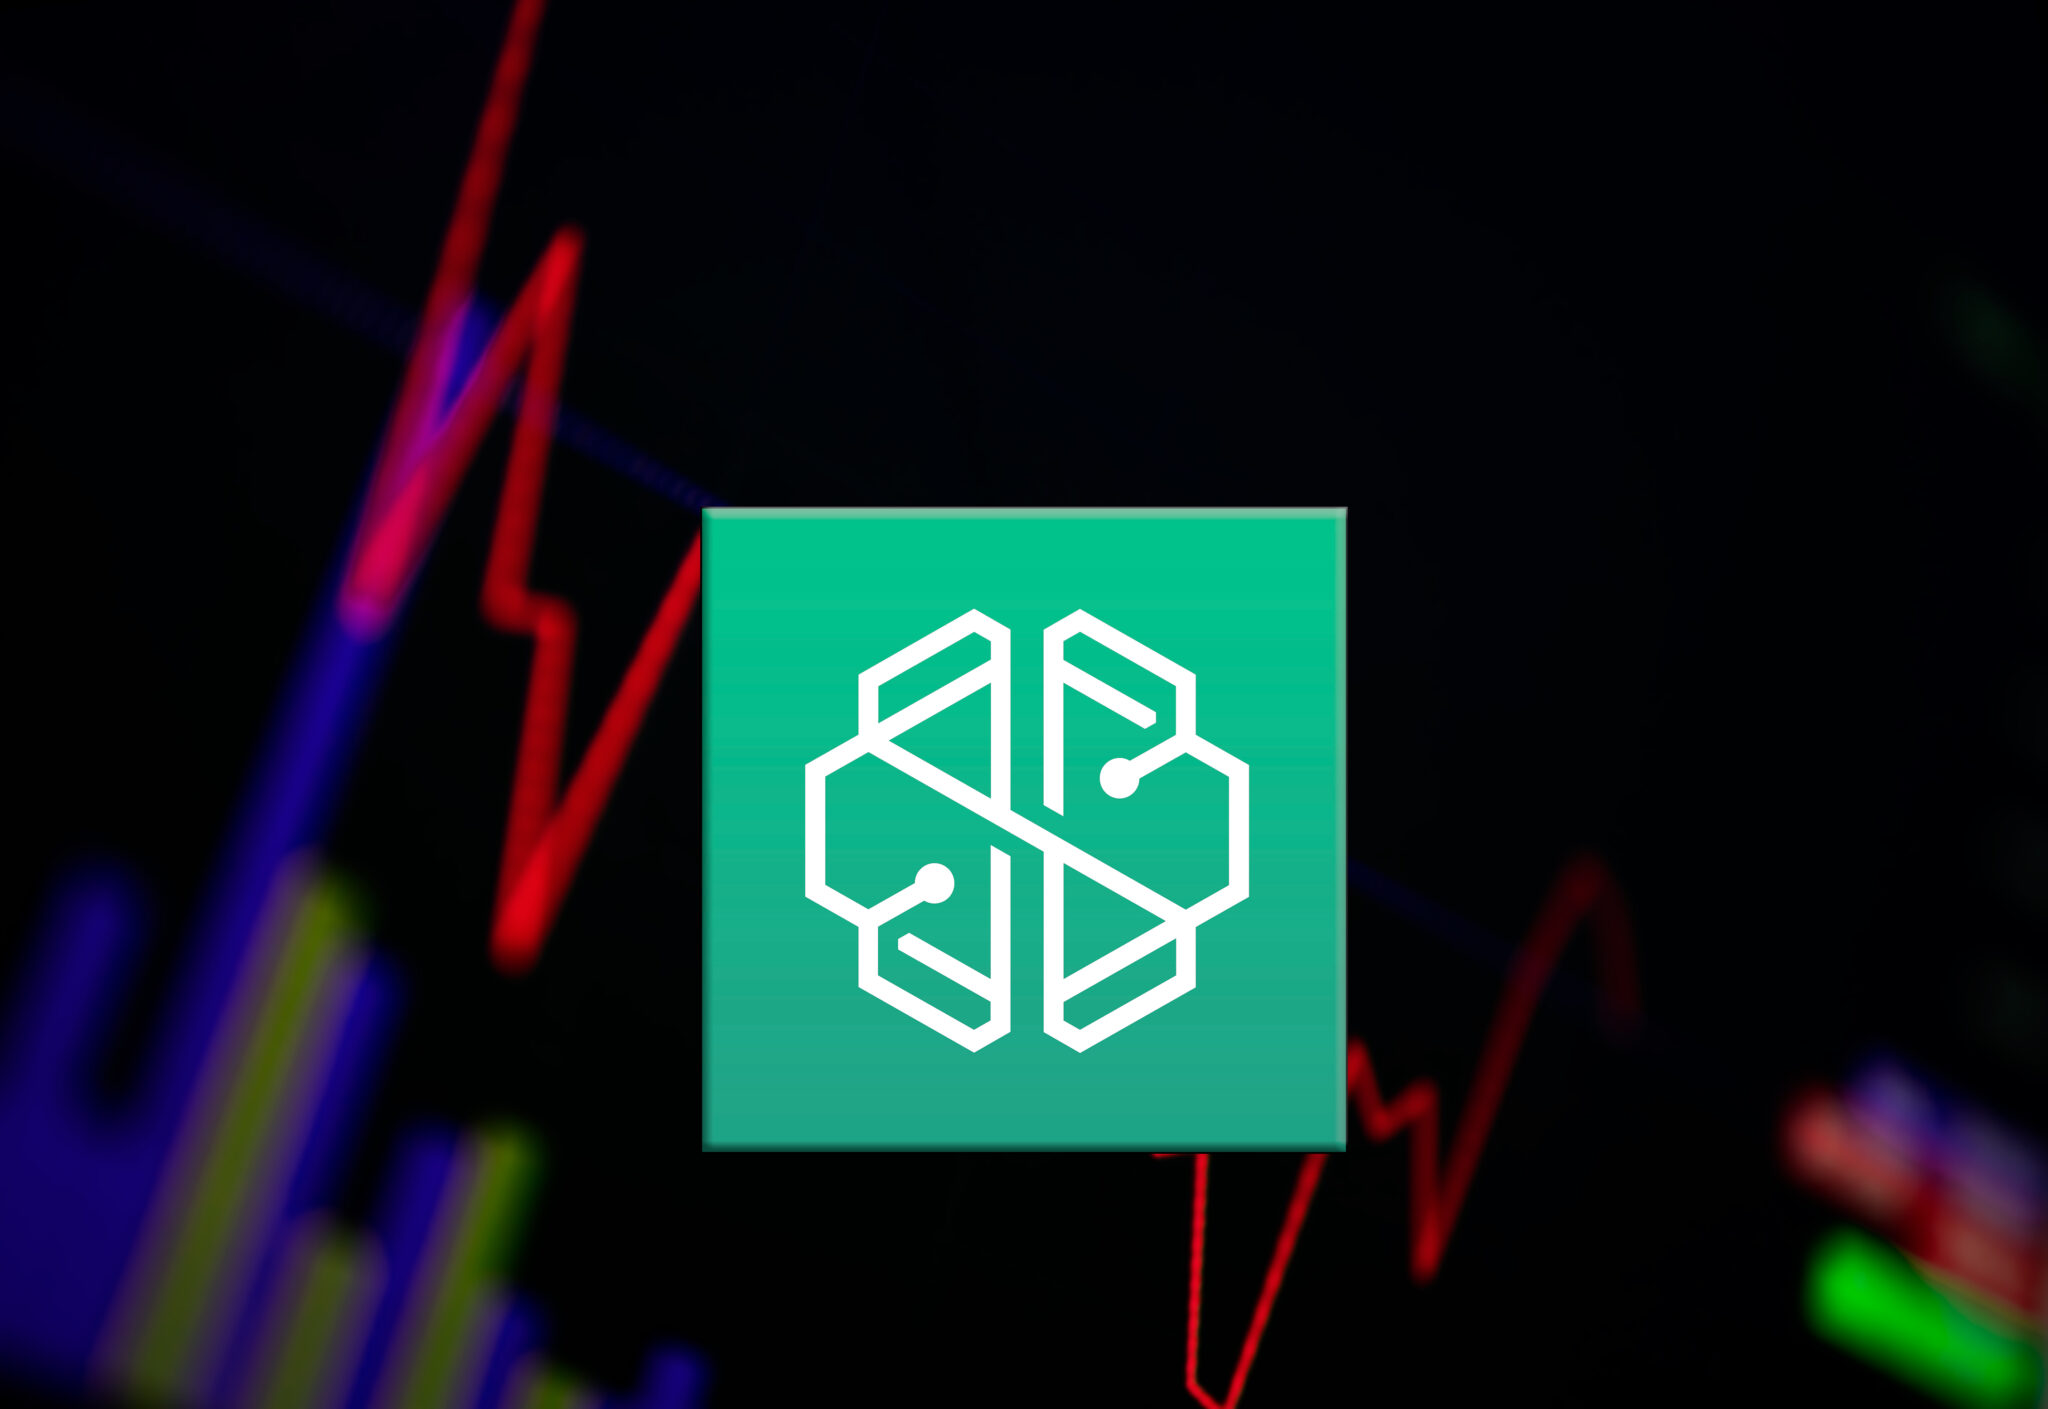 SwissBorg CHSB Cryptocurrency. coin growth chart on the exchange, chart